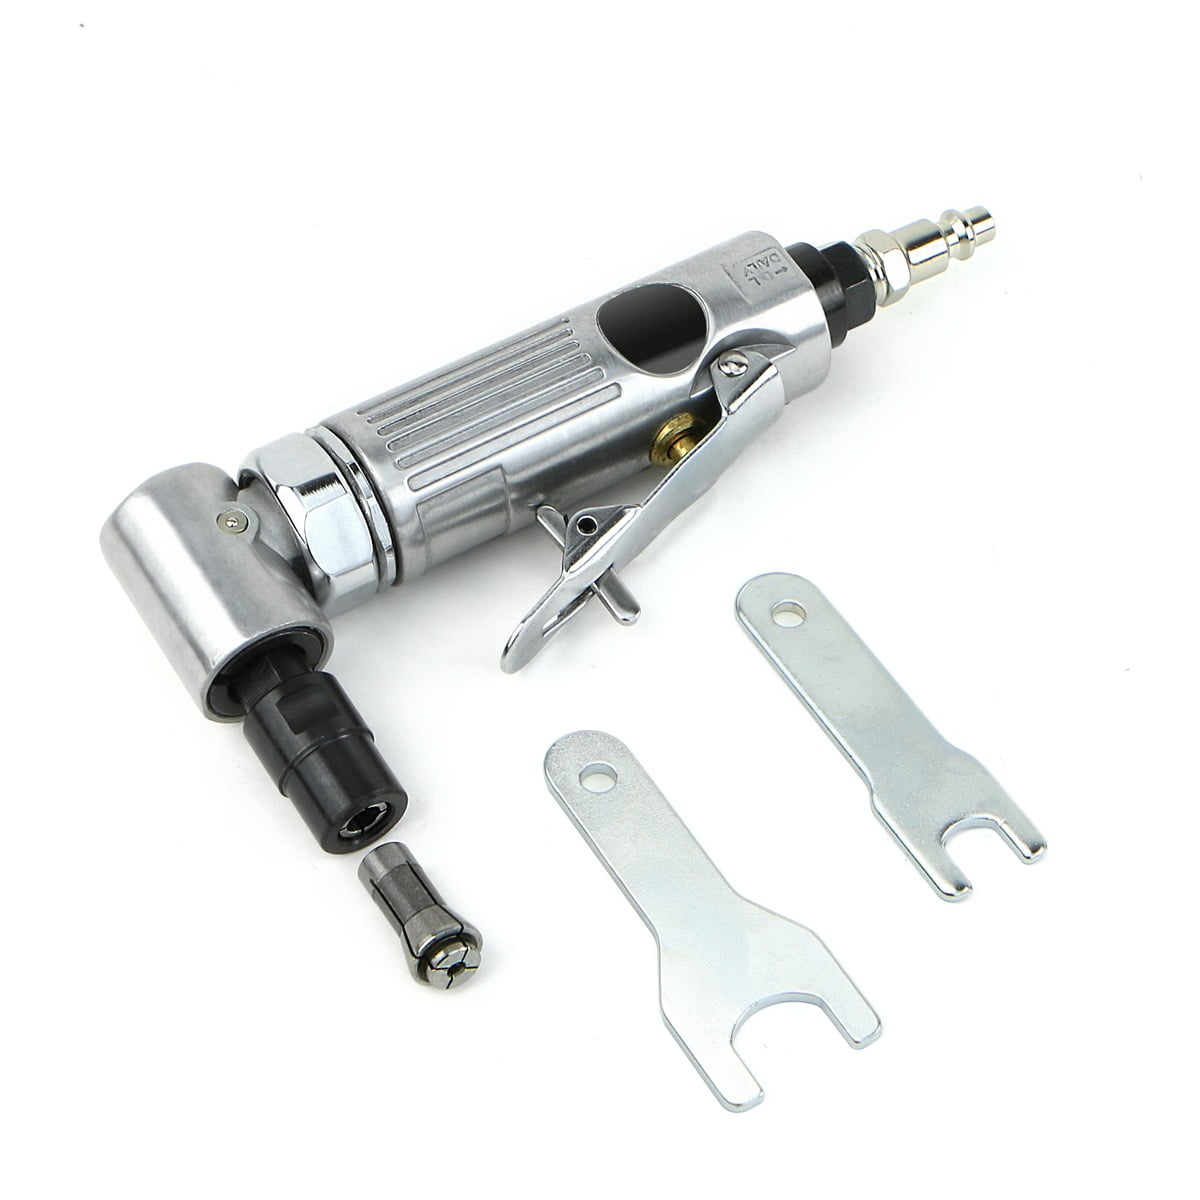 Mini AIR ANGLE DIE GRINDER Pneumatic Cut Off Polisher Cleaning Cutting 1/4" Tool 